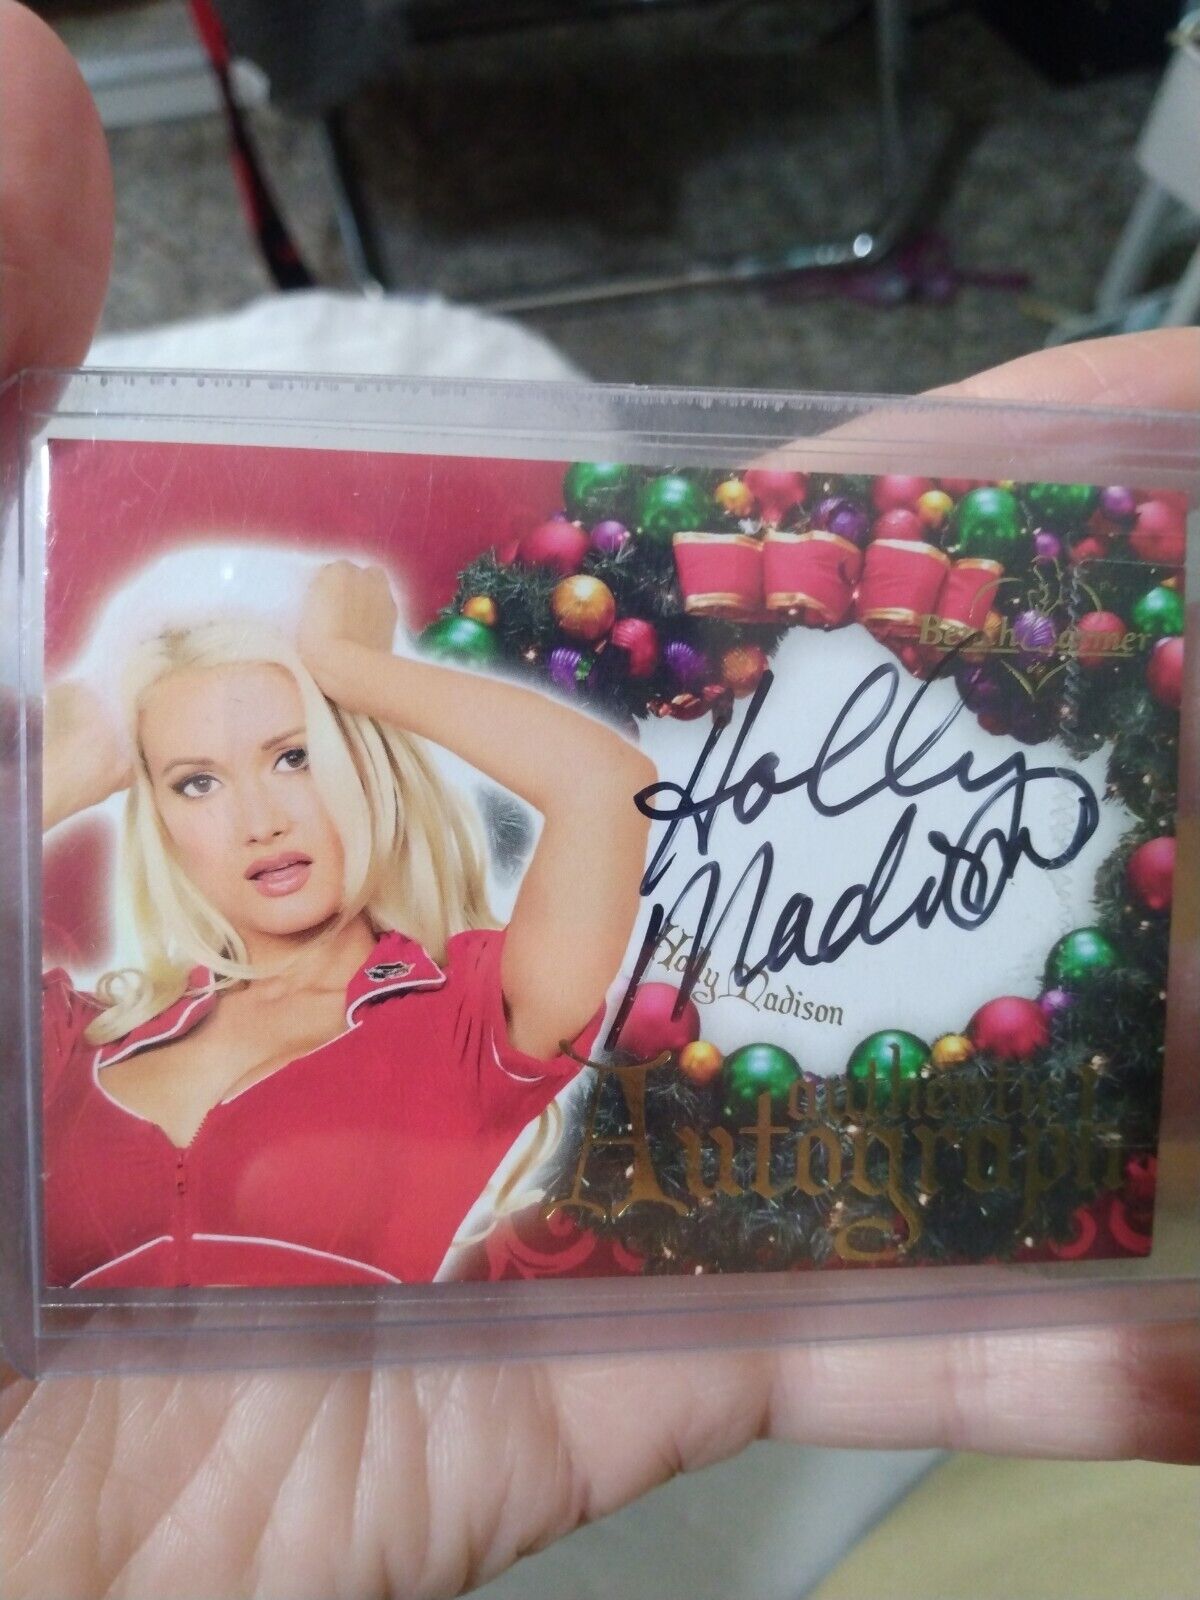 Holly Madison Playboy playmate Bench Warmer 2006 Holiday Authentic Autograph 🔥